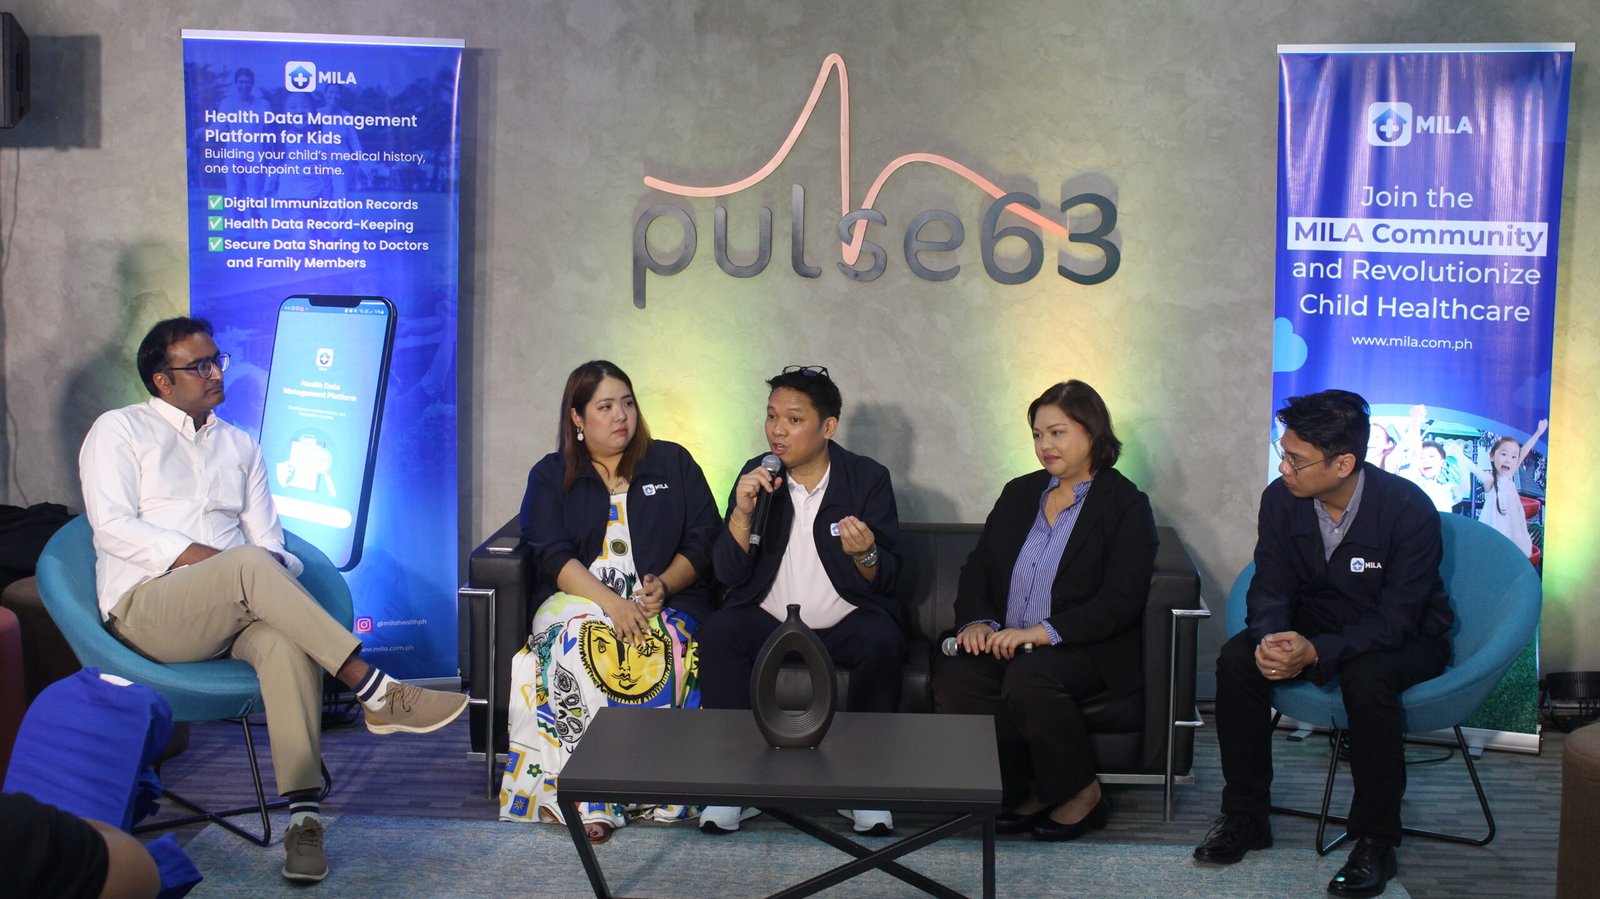 MILA App to help Filipino mothers with childrens medical records